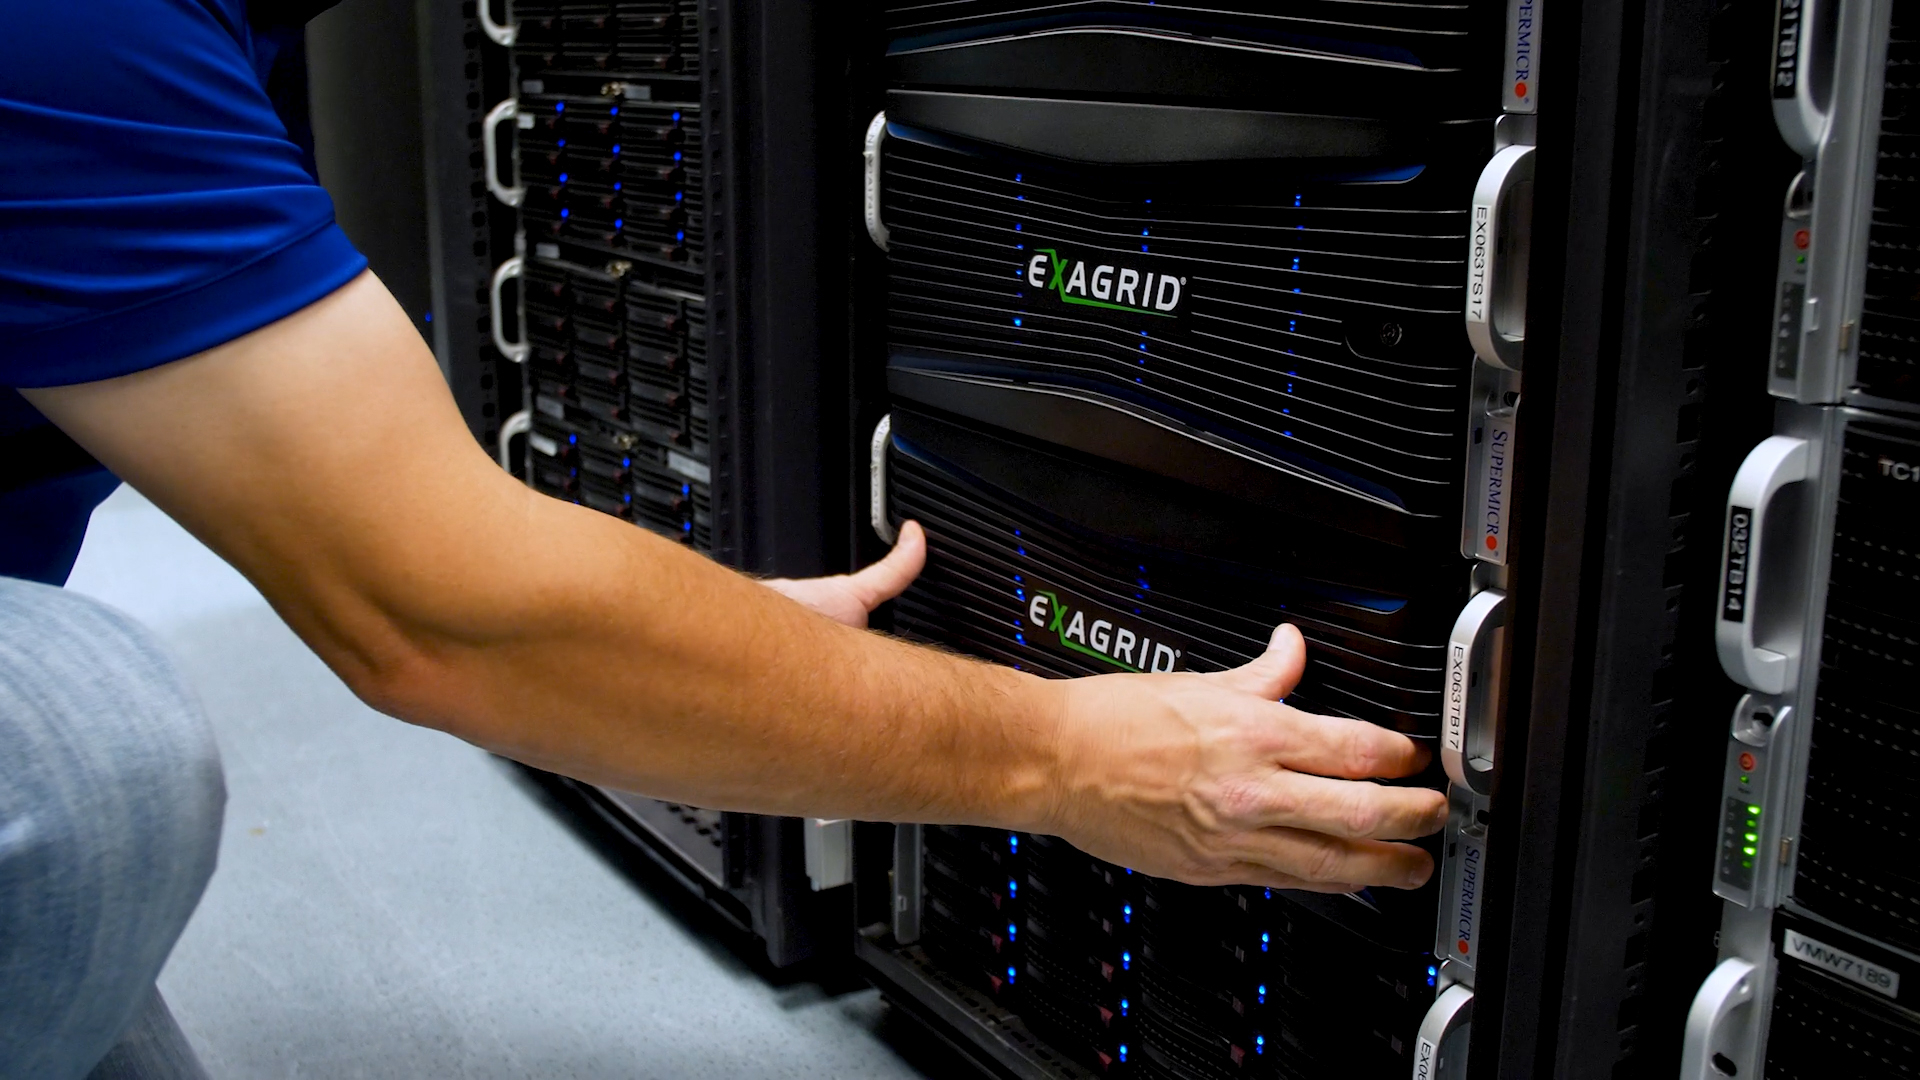 Learn more about ExaGrid Tiered Backup Storage in this short video.